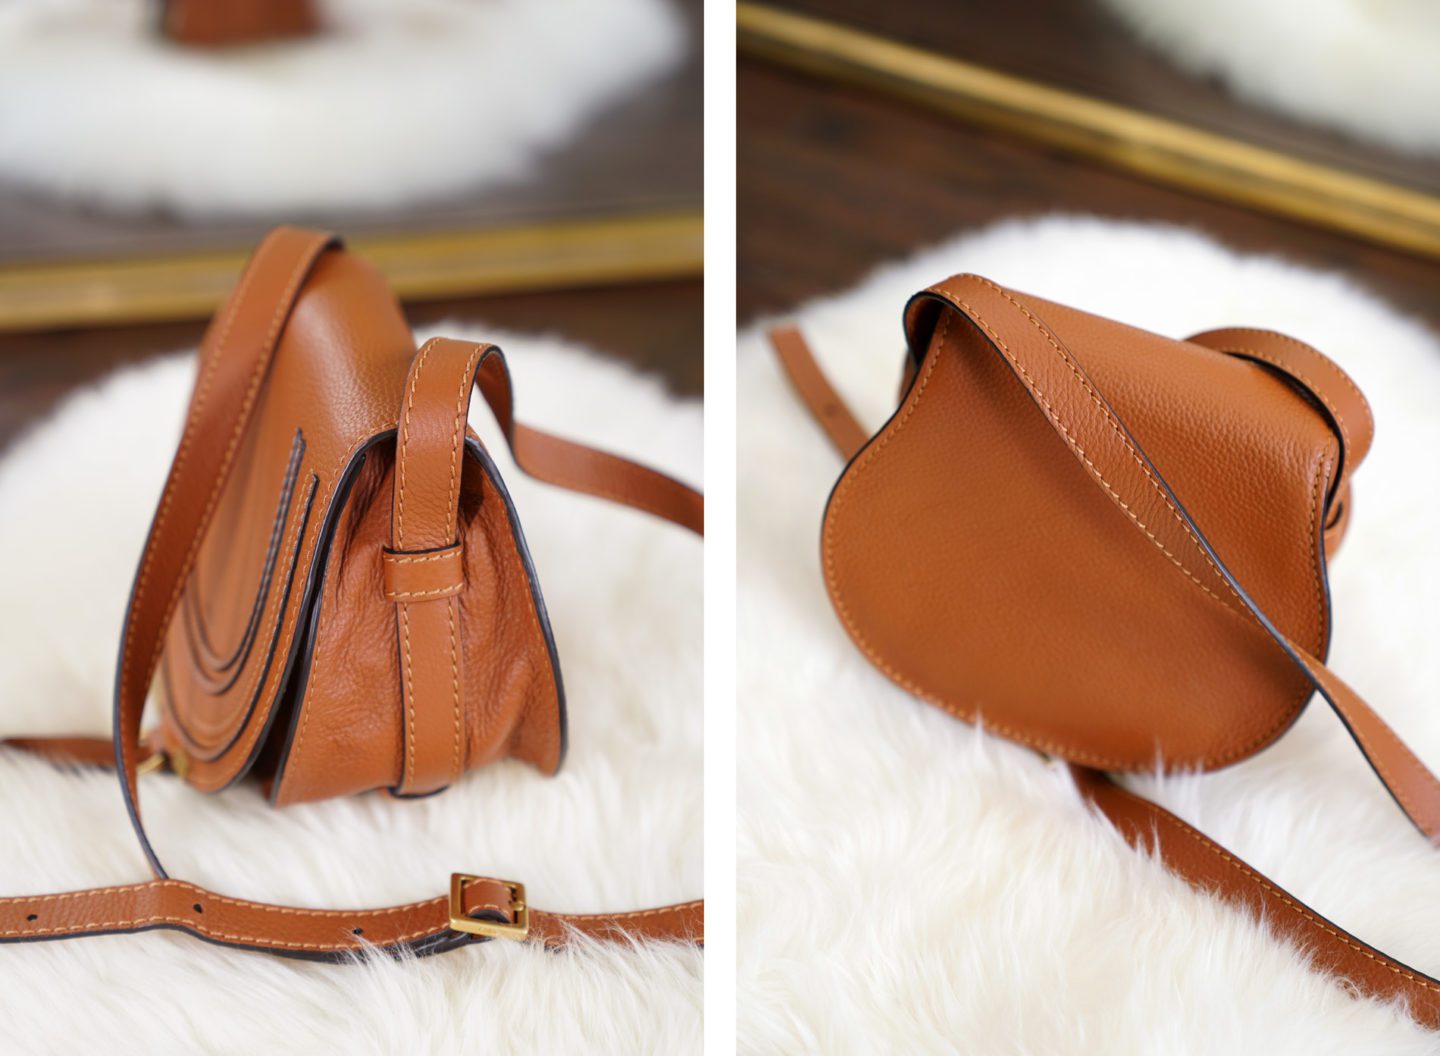 Chloe Mini Marcie Bag Side and Back View | The Beauty Look Book